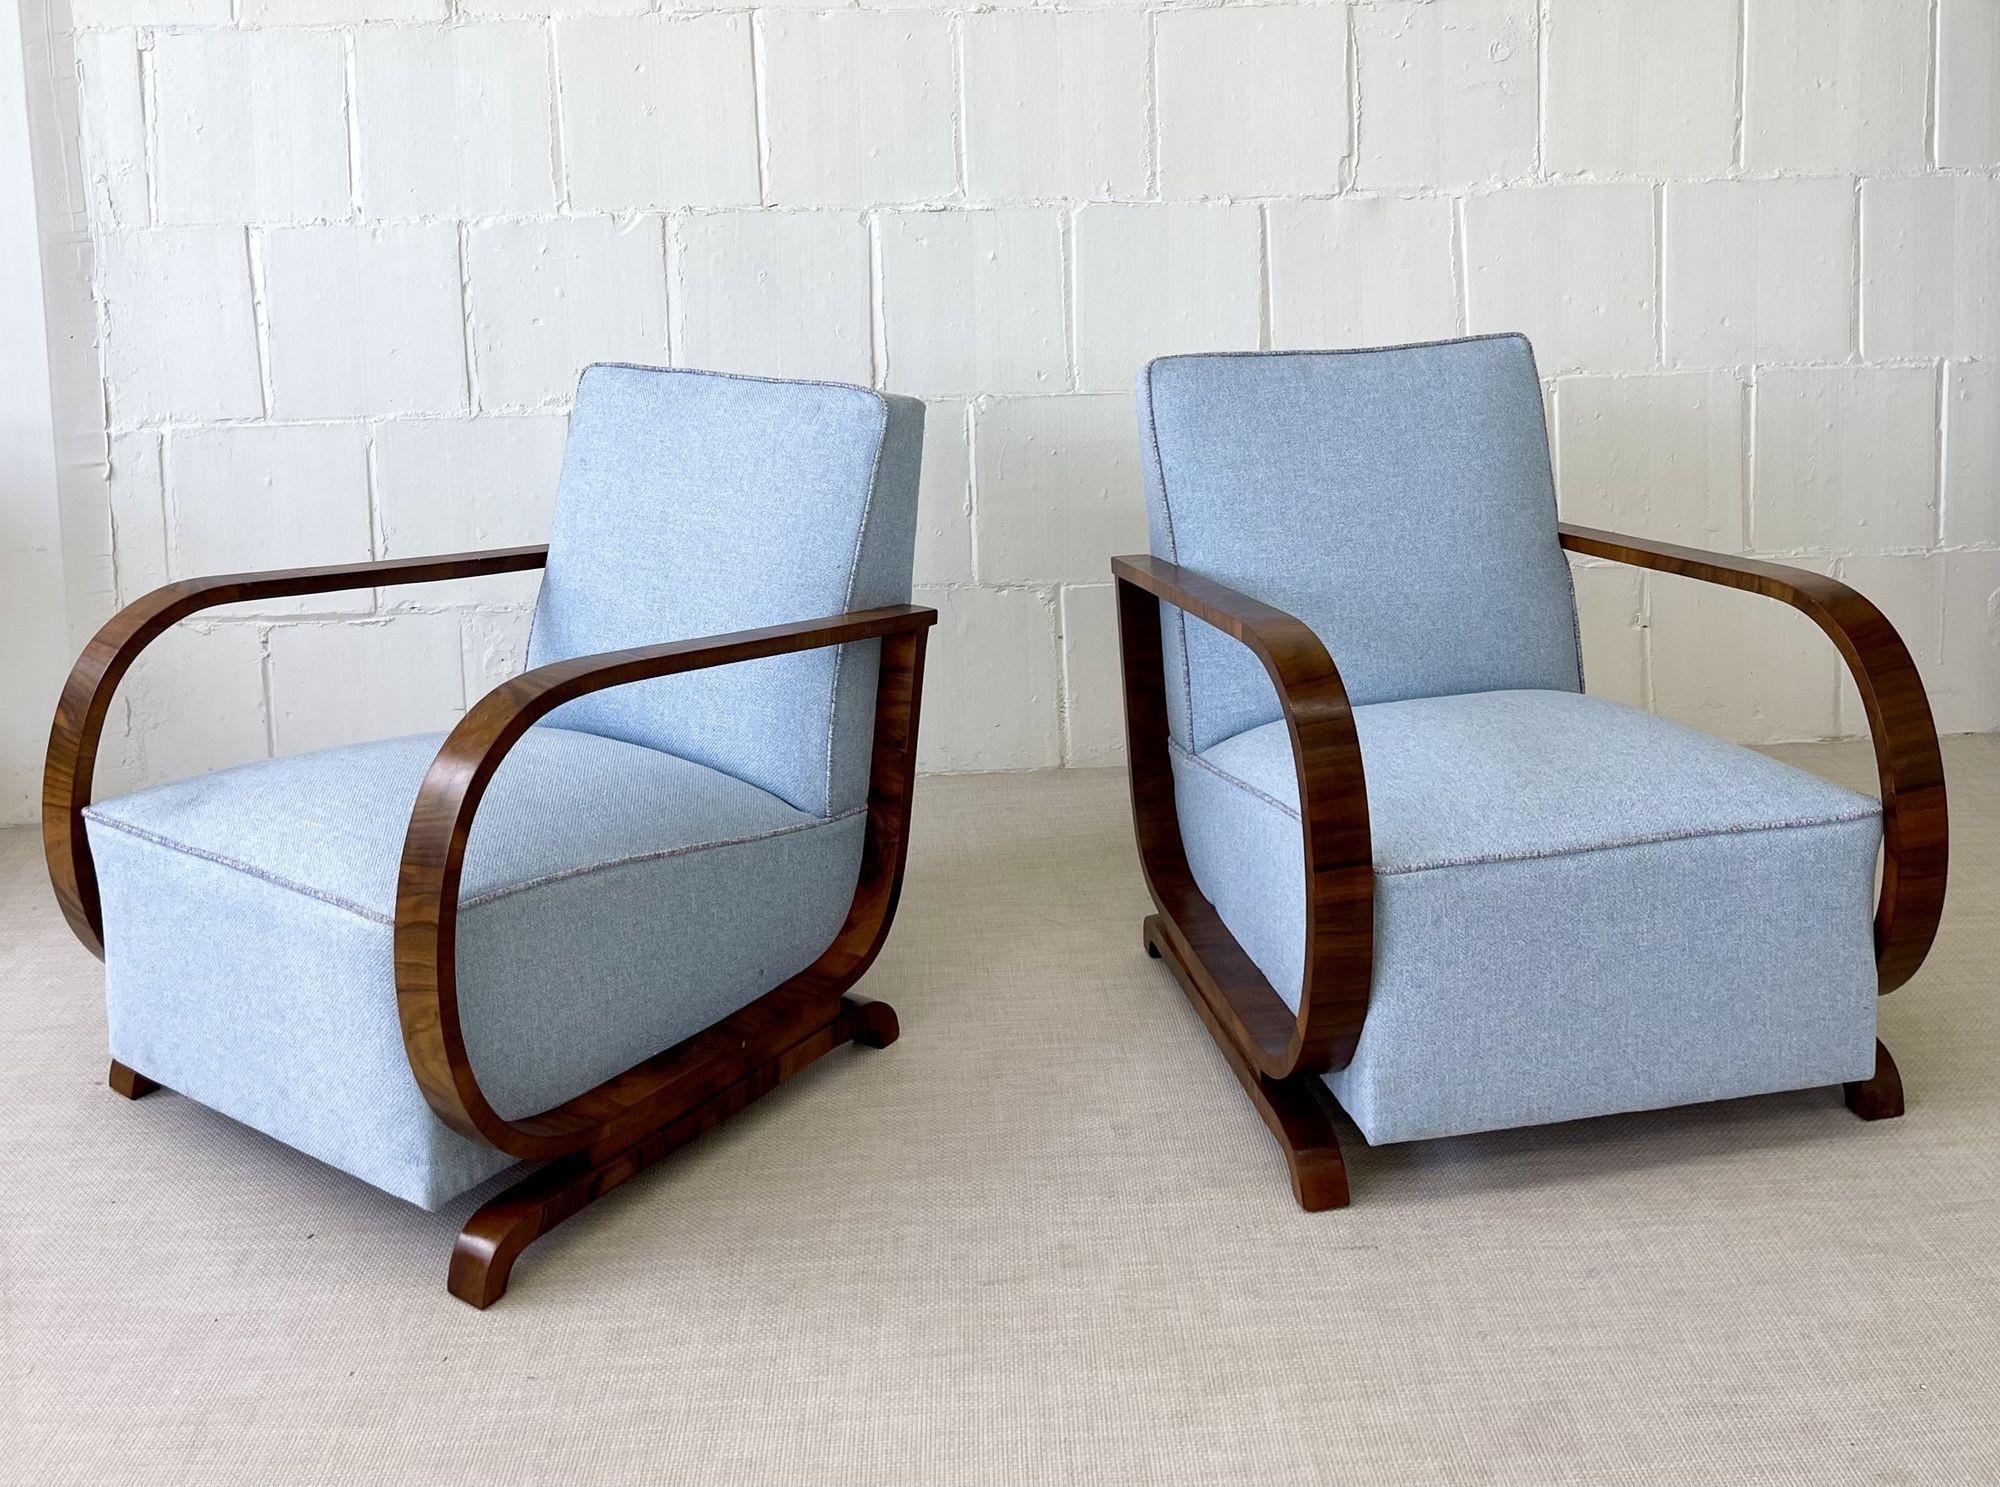 Textile Pair of Art Deco Lounge / Arm Chairs, Walnut, Fabric, Mid-Century Style, Sweden